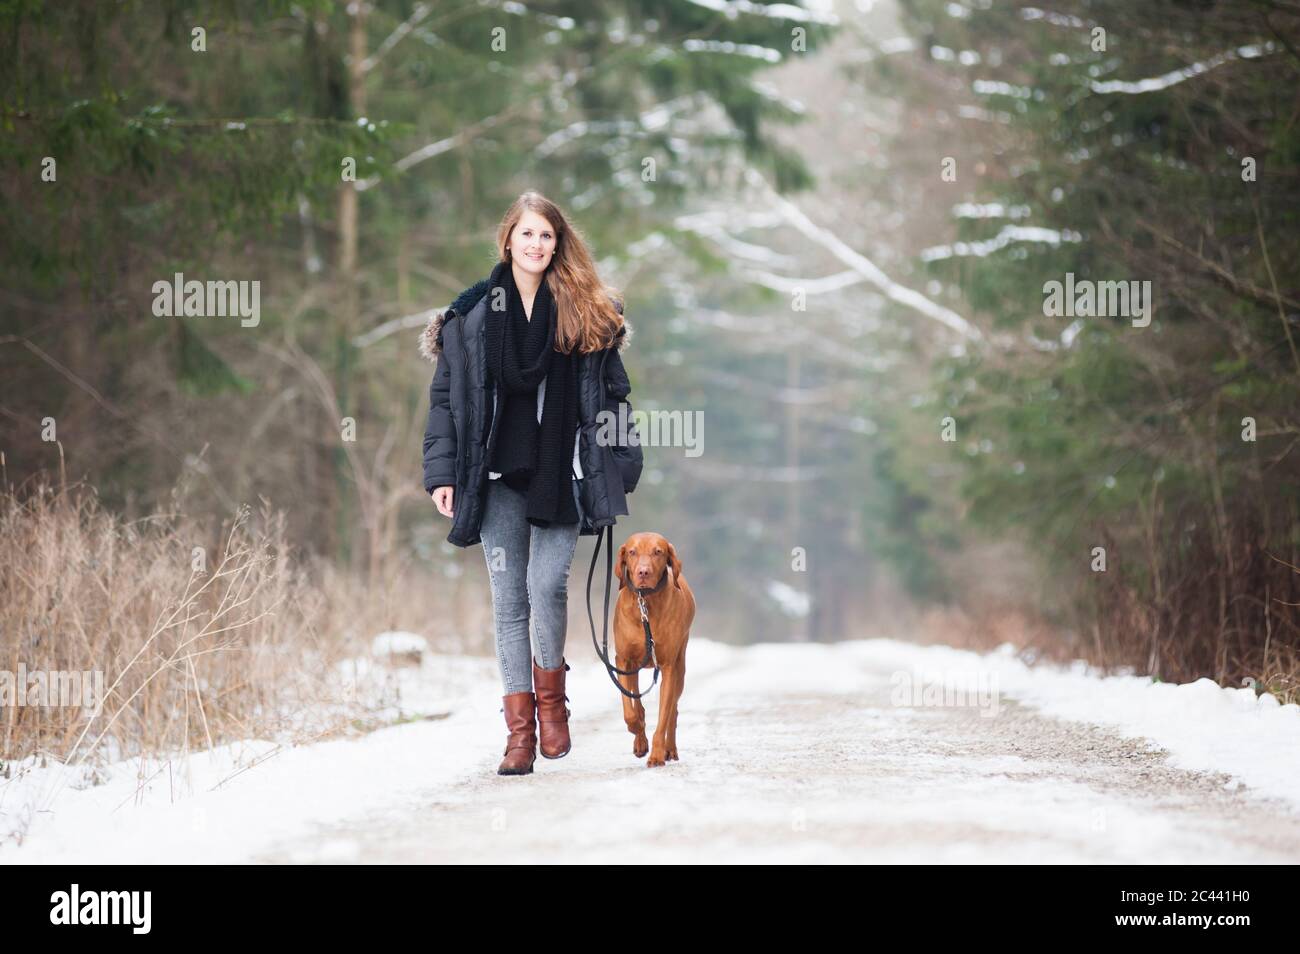 Beautiful young woman walking with dog on road amidst trees in forest during winter Stock Photo